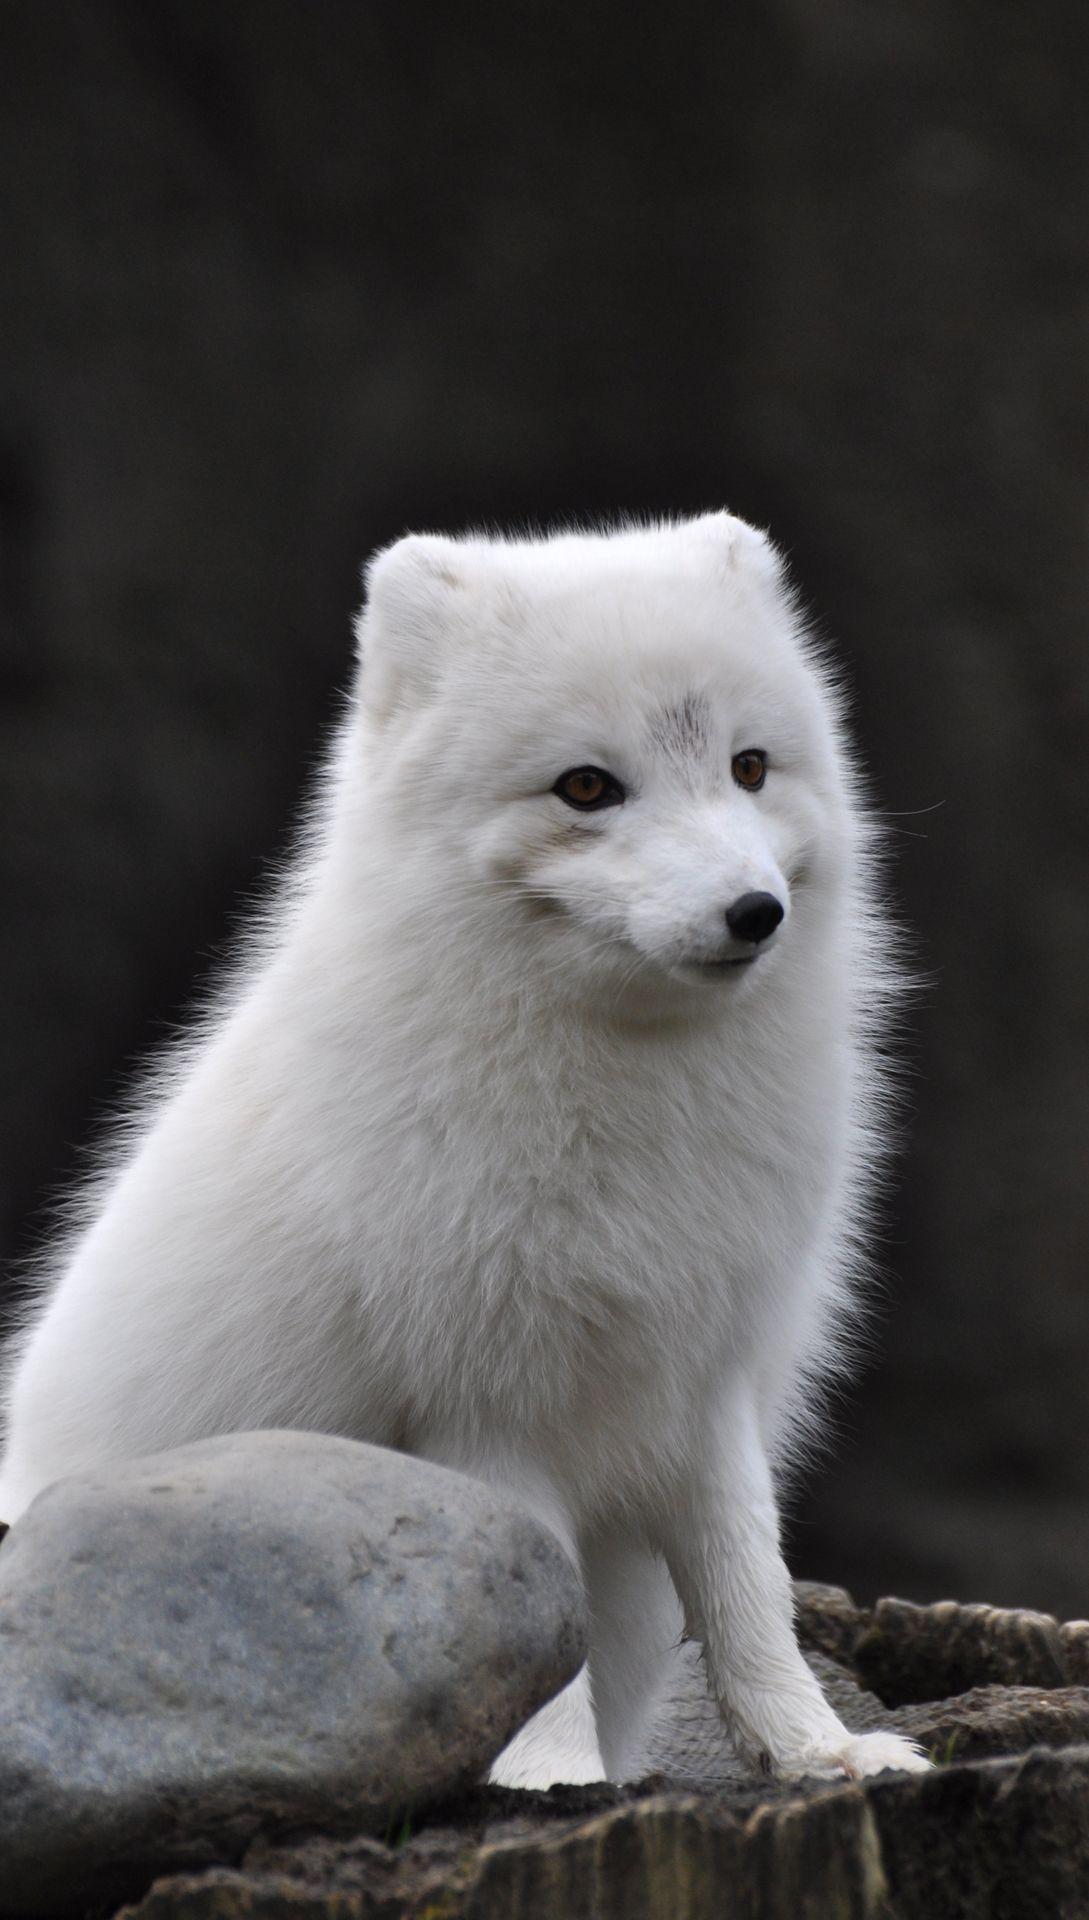 Arctic fox htc one wallpaper, free and easy to download